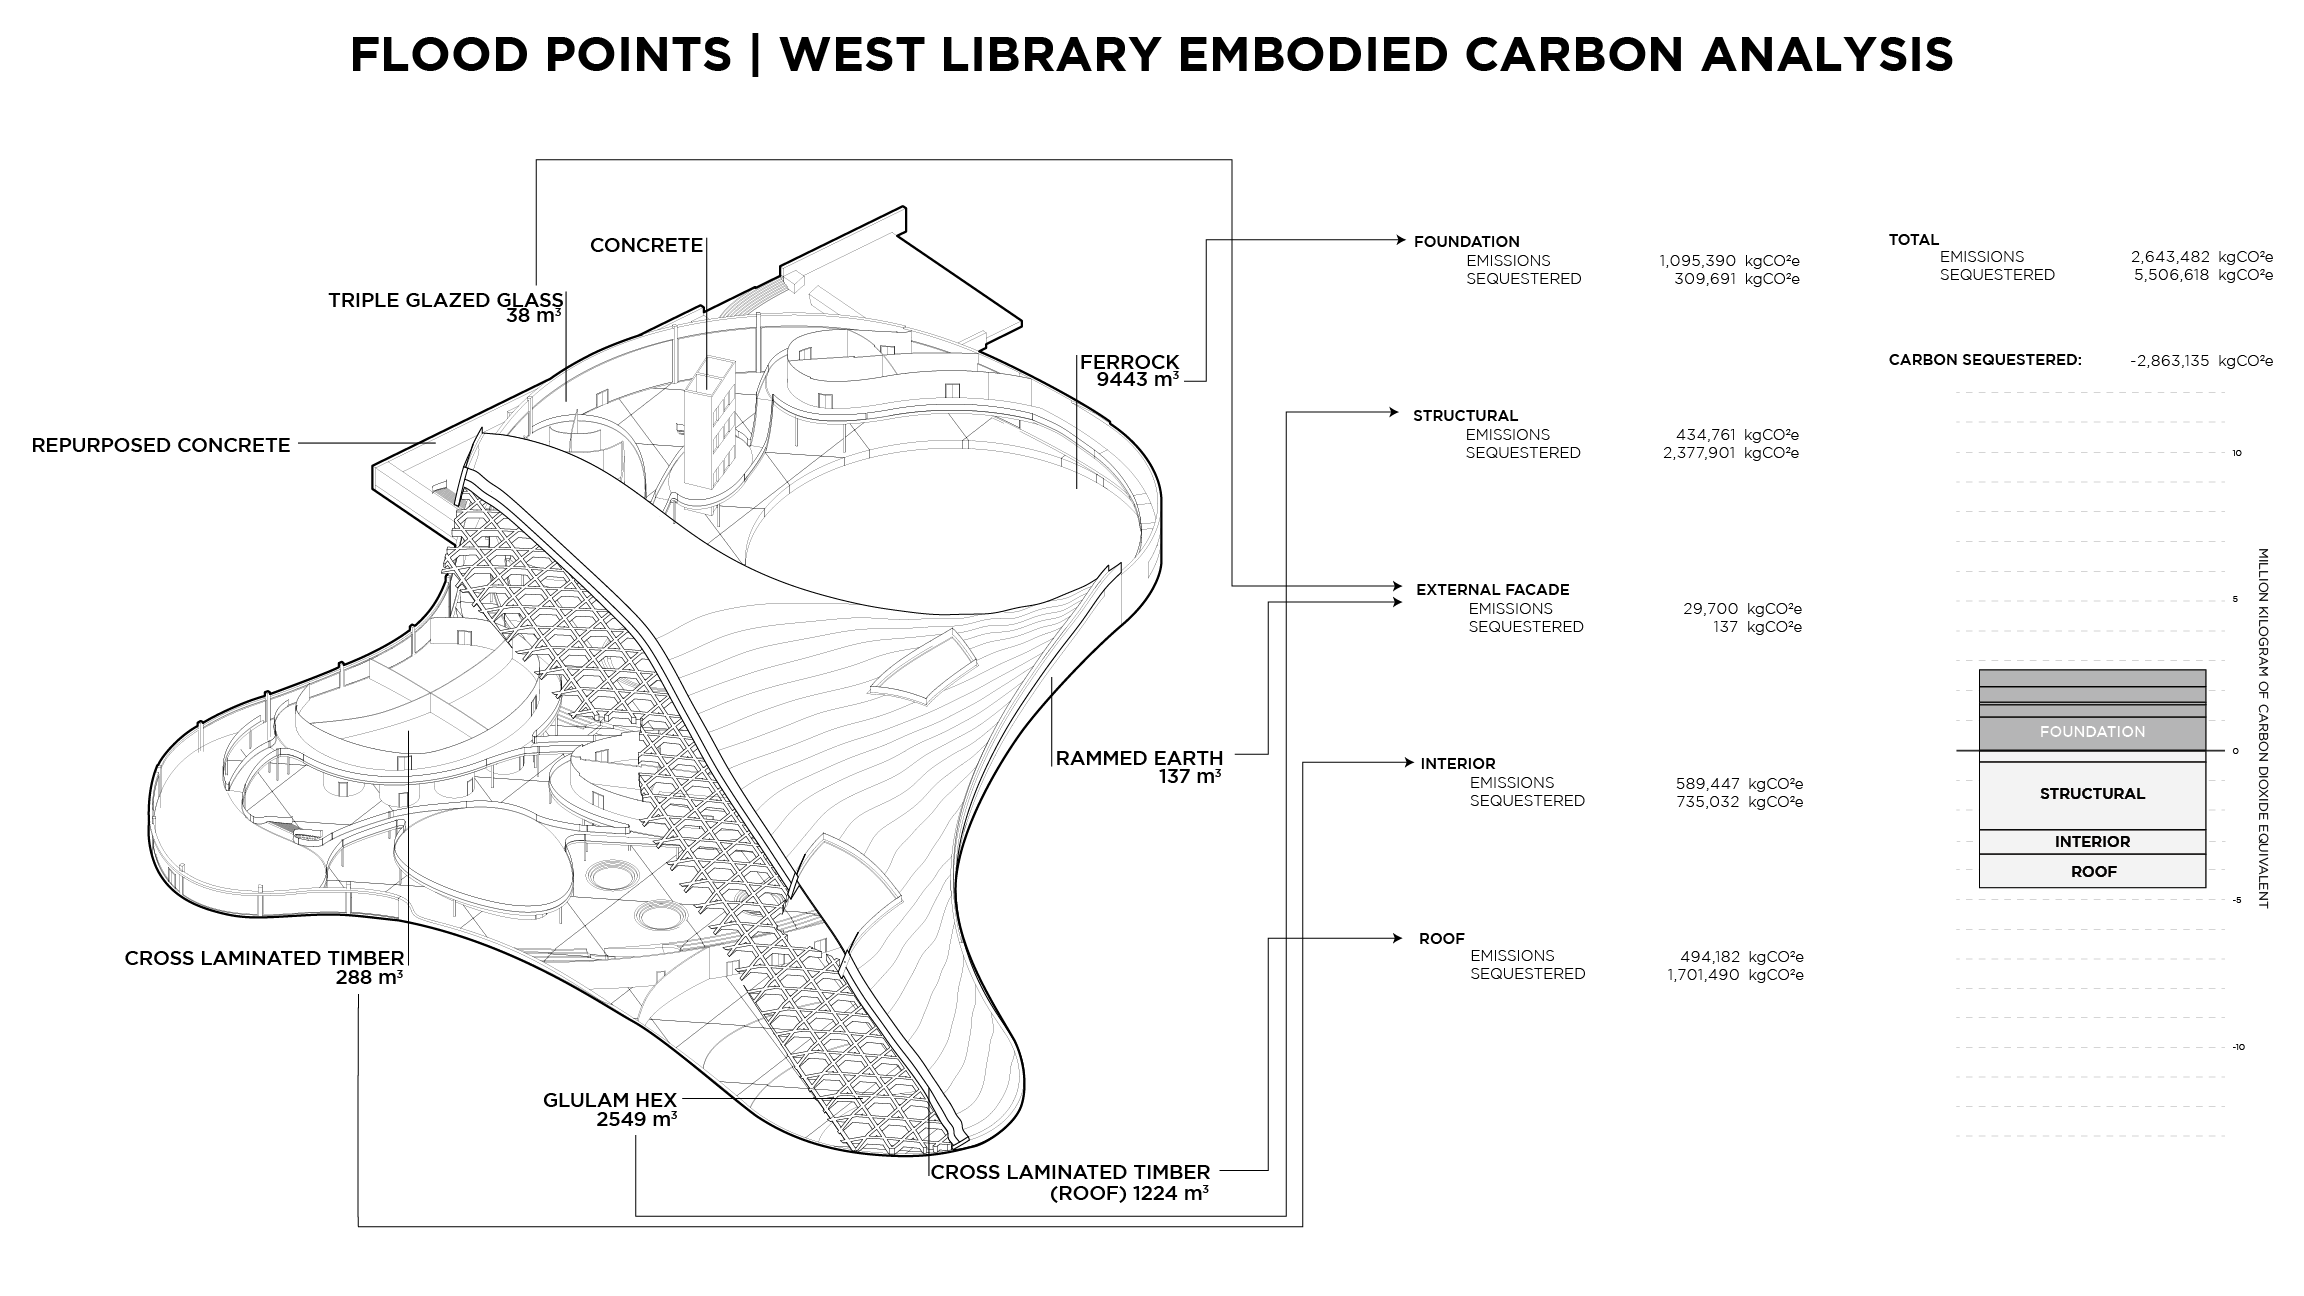 FLOODPOINTS_West Library Embodied Carbon Analysis.png